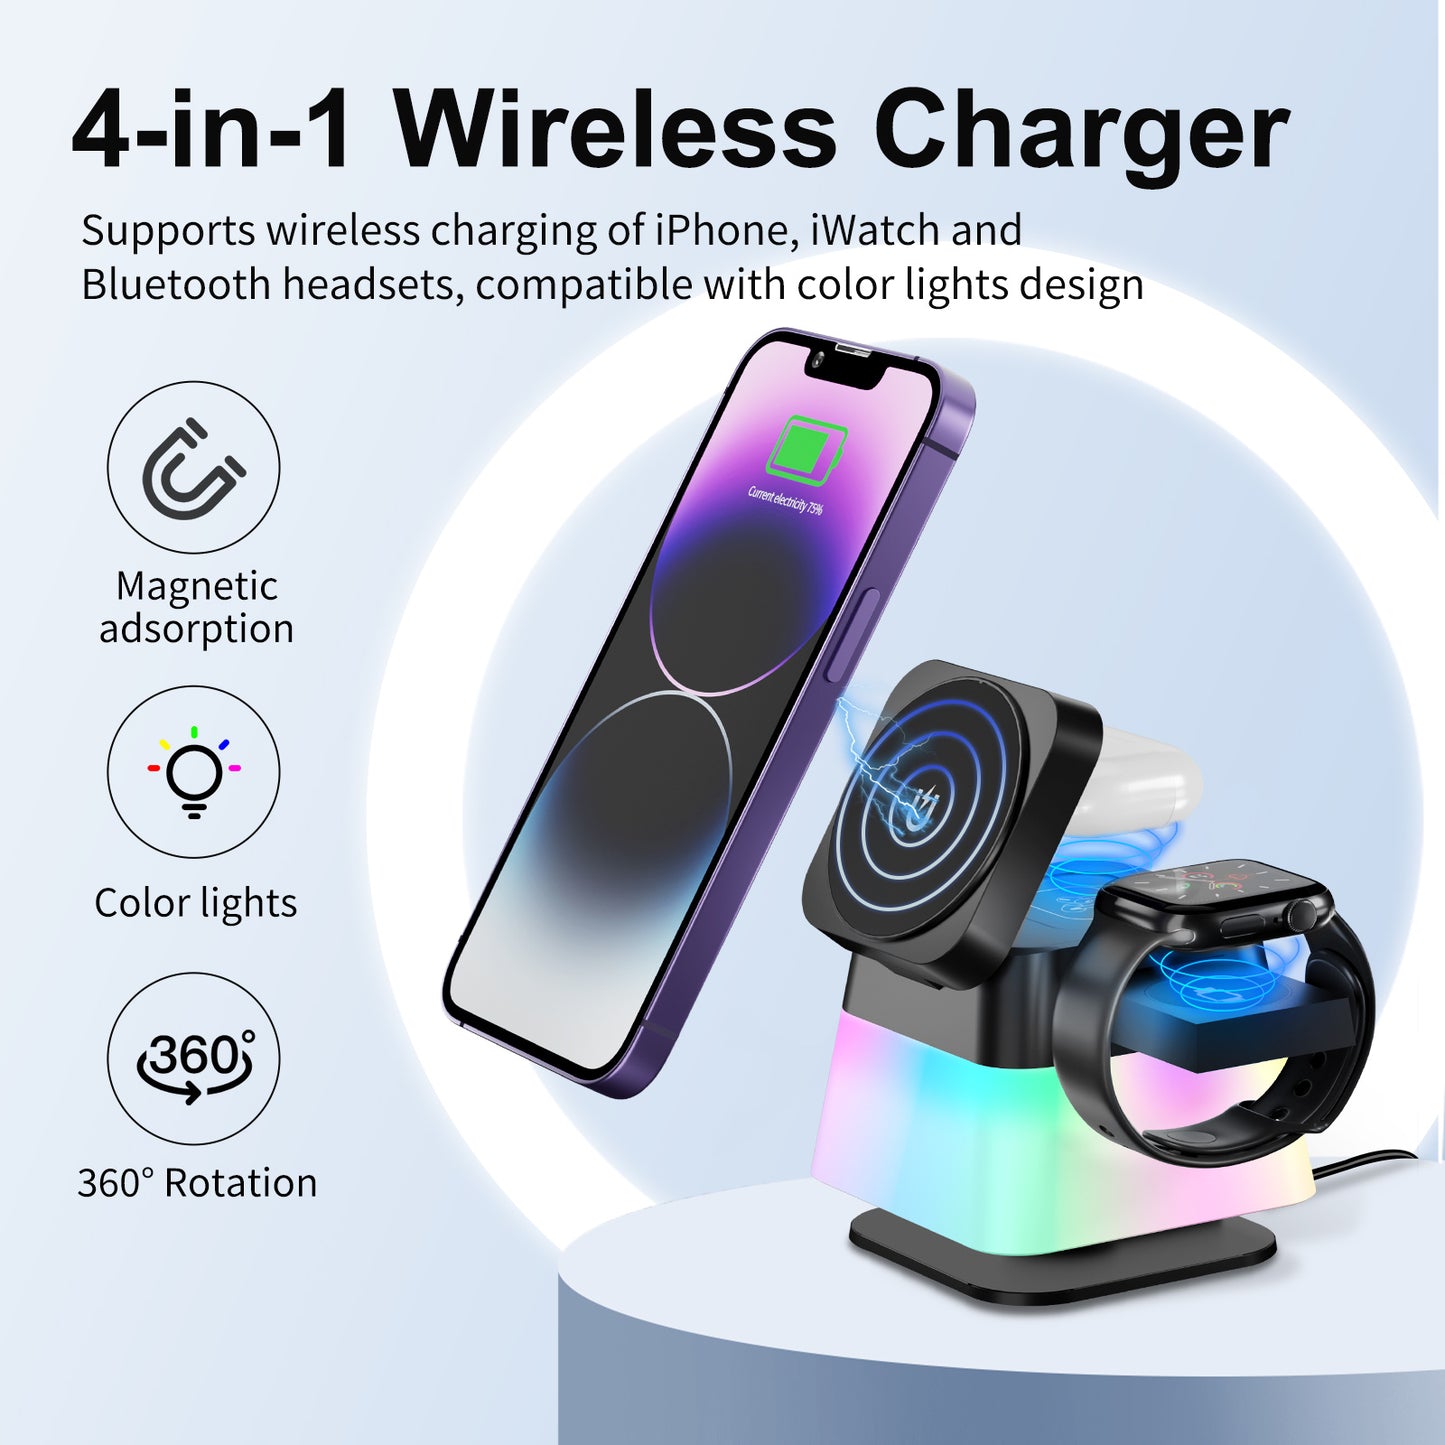 4-in-1 Magnetic Wireless Charger with Night Light